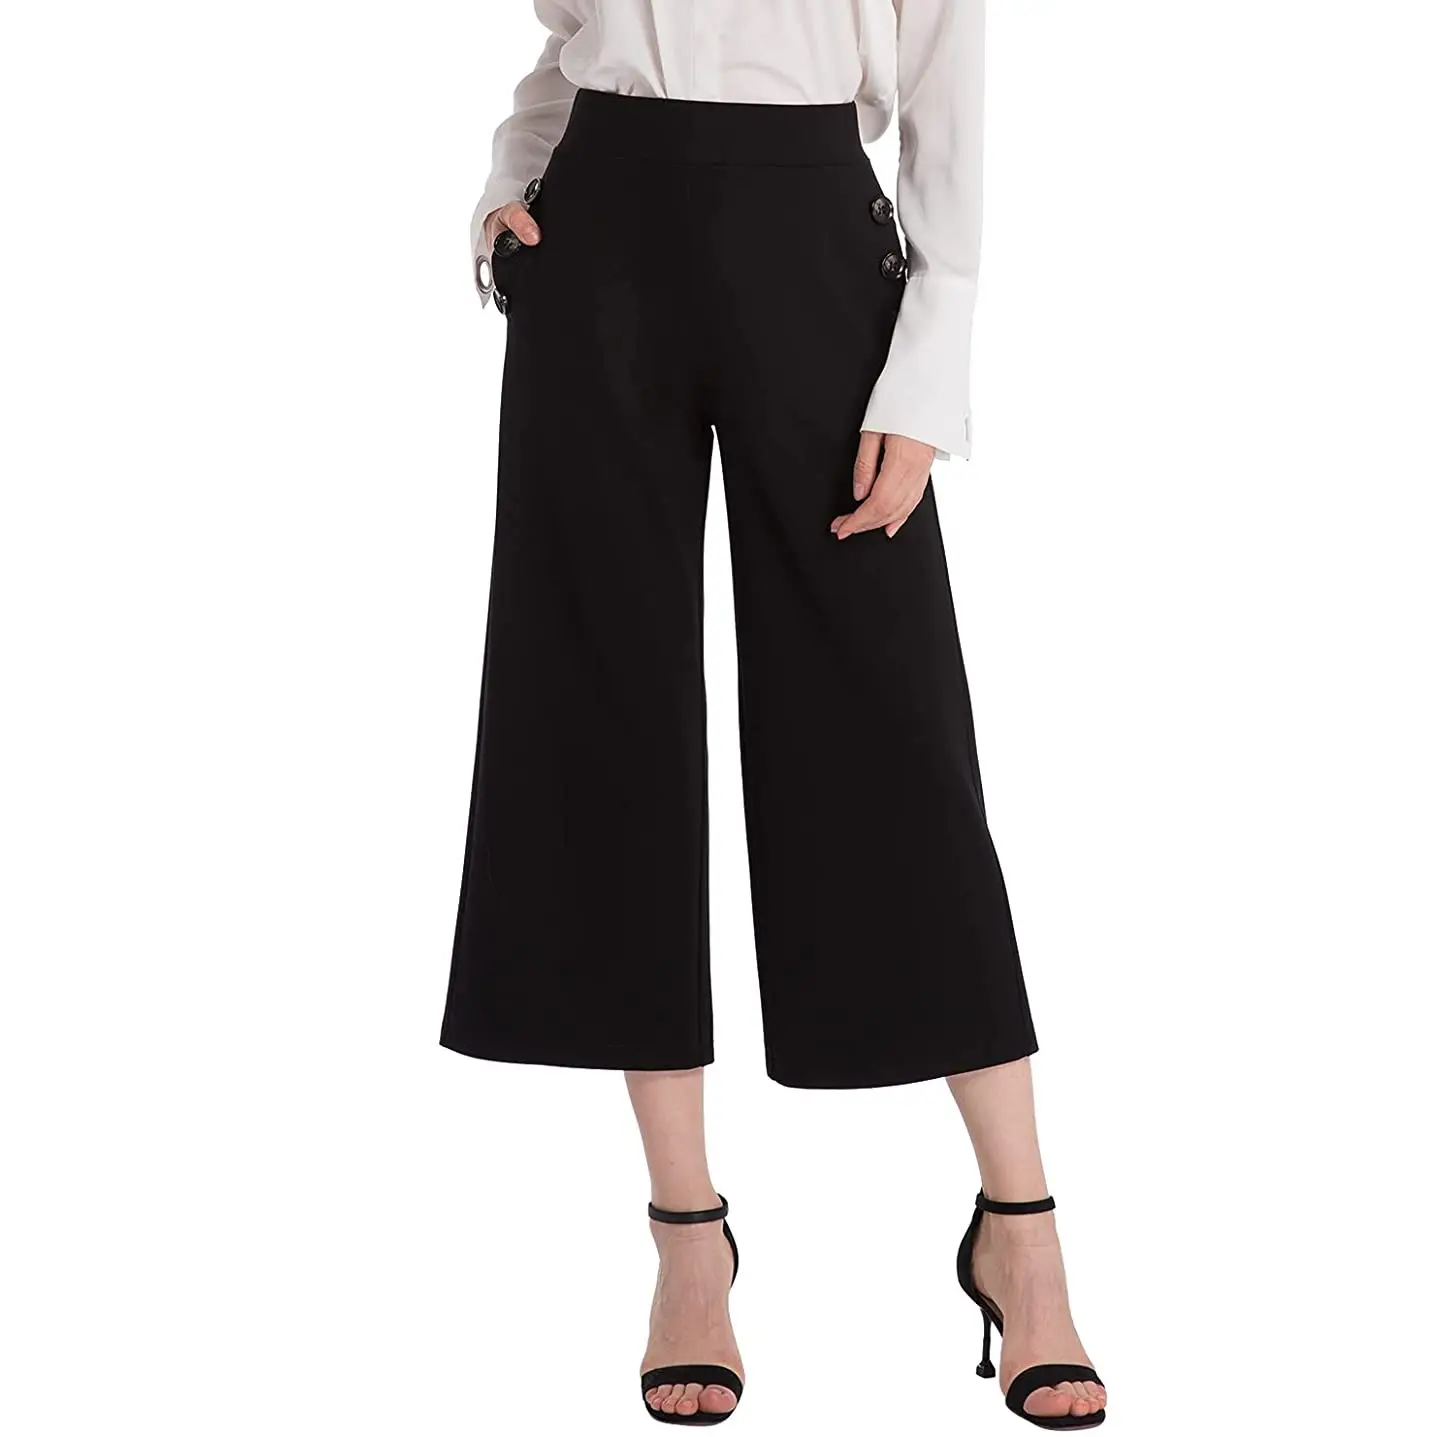 Black Wide Leg Pants with pockets for Female Business Casual Dress Pants Stretch High Waist casual and comfortable women's pants